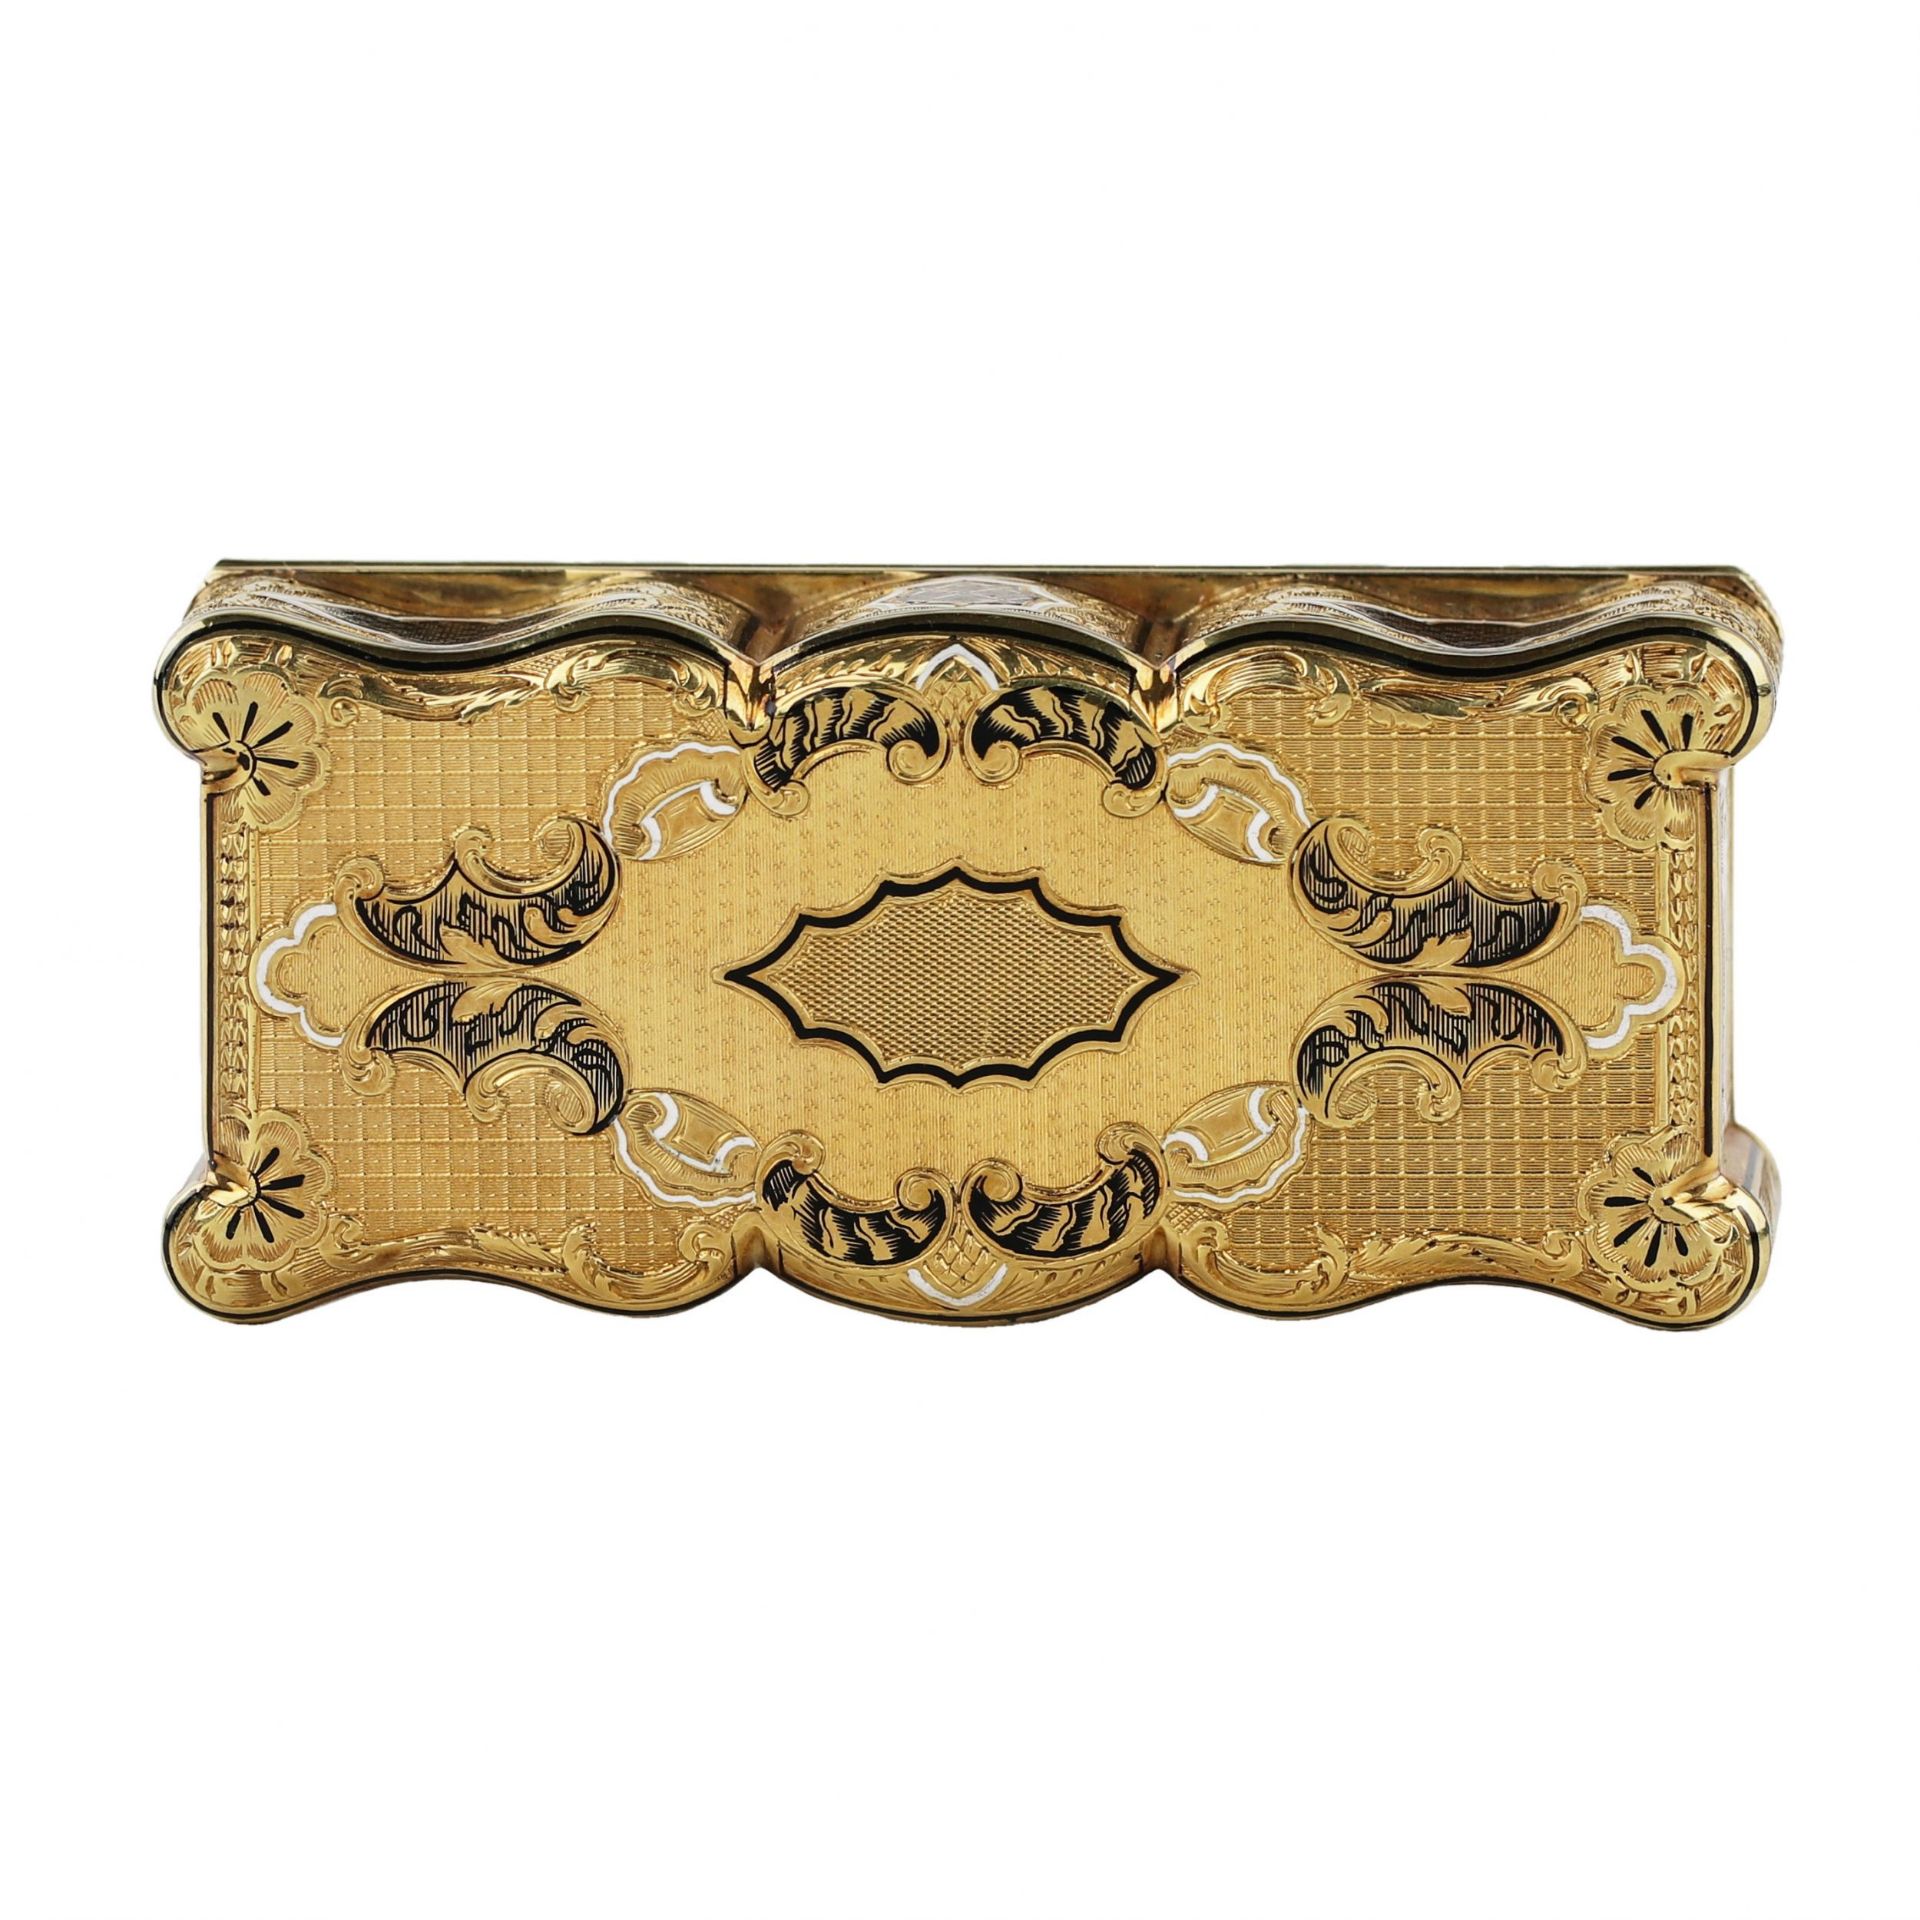 18K gold enameled snuffbox with scenes of equestrian hunting. French work of the 19th century. - Bild 5 aus 10